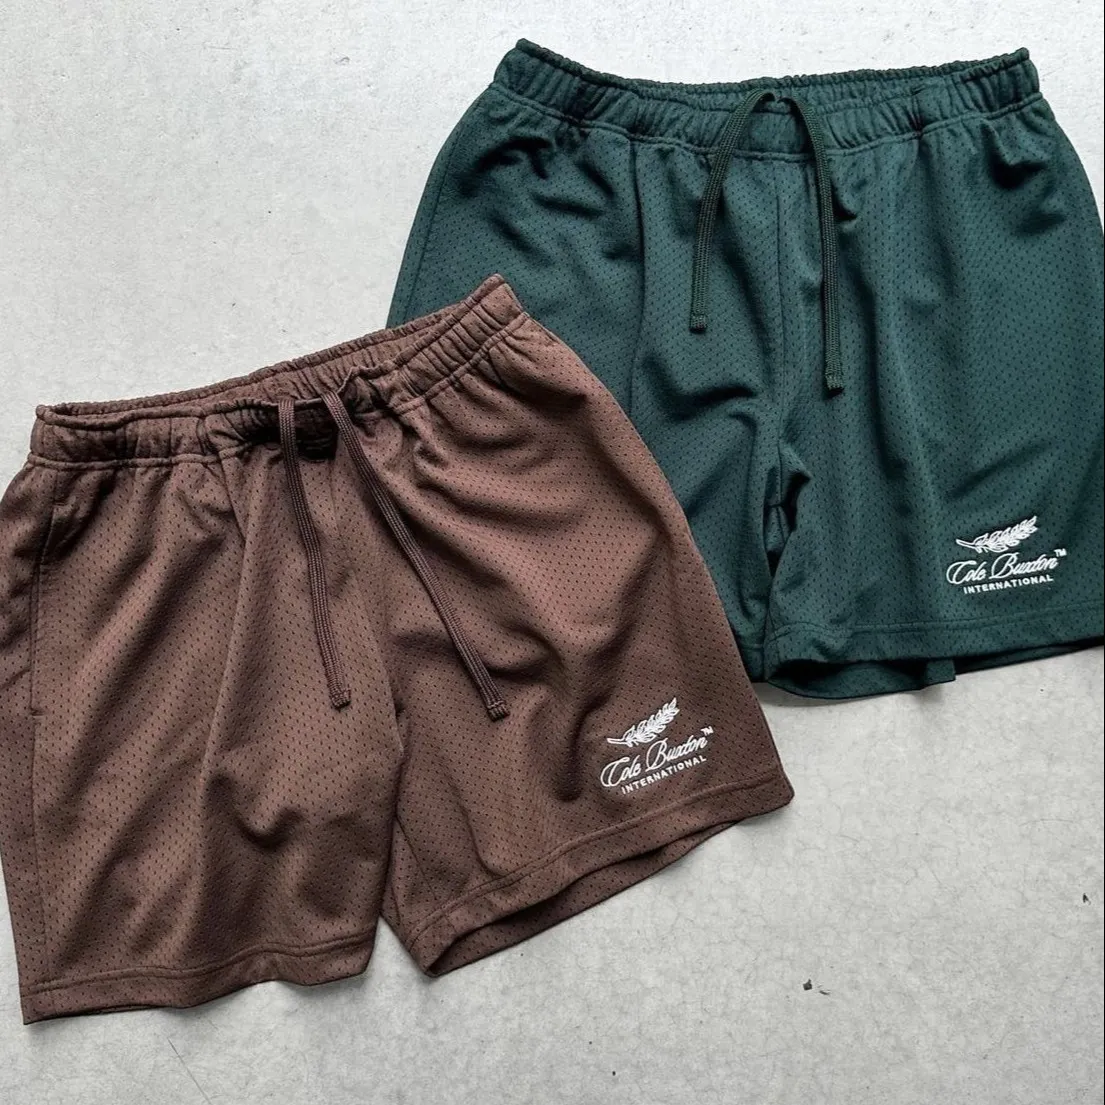 Wholesale Mesh Shorts Plus size Polyester Blank Men's Basketball Shorts 100% Polyester Casual Short Pant With Pocket